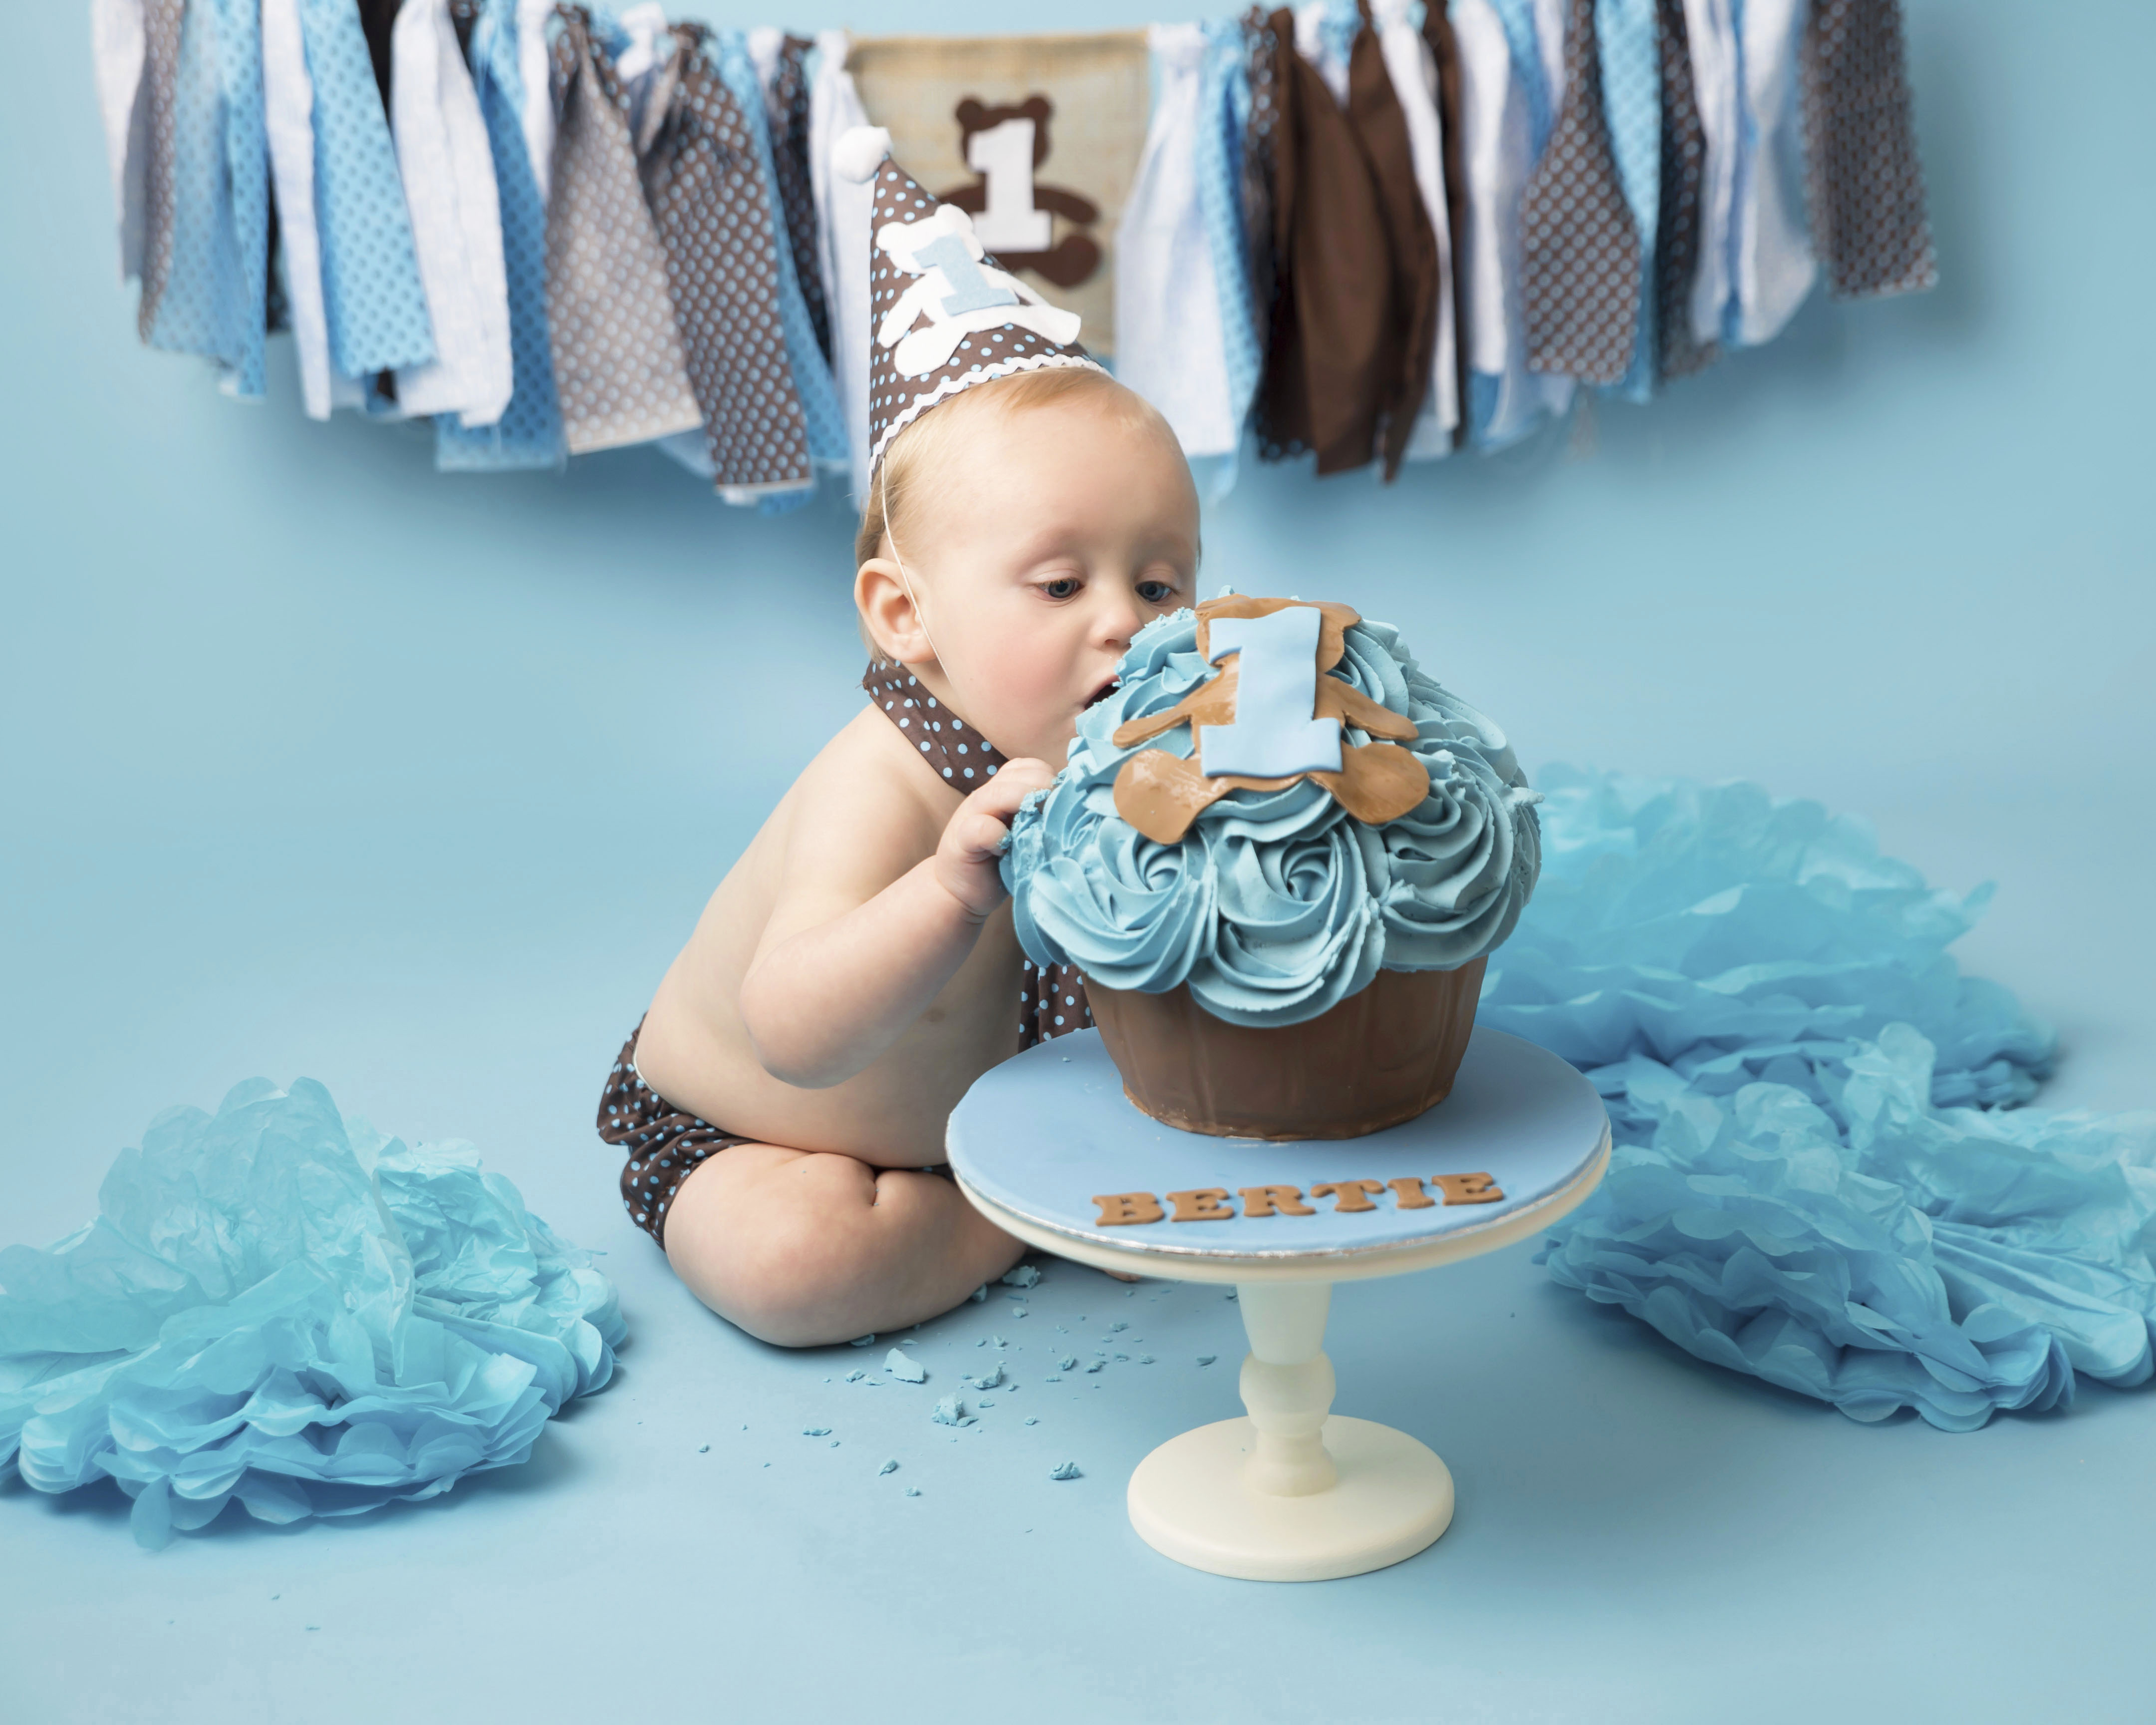 1st Birthday Cake Smash Photo Session Wirra, cake with blue icing along with brown matching costume and bunting